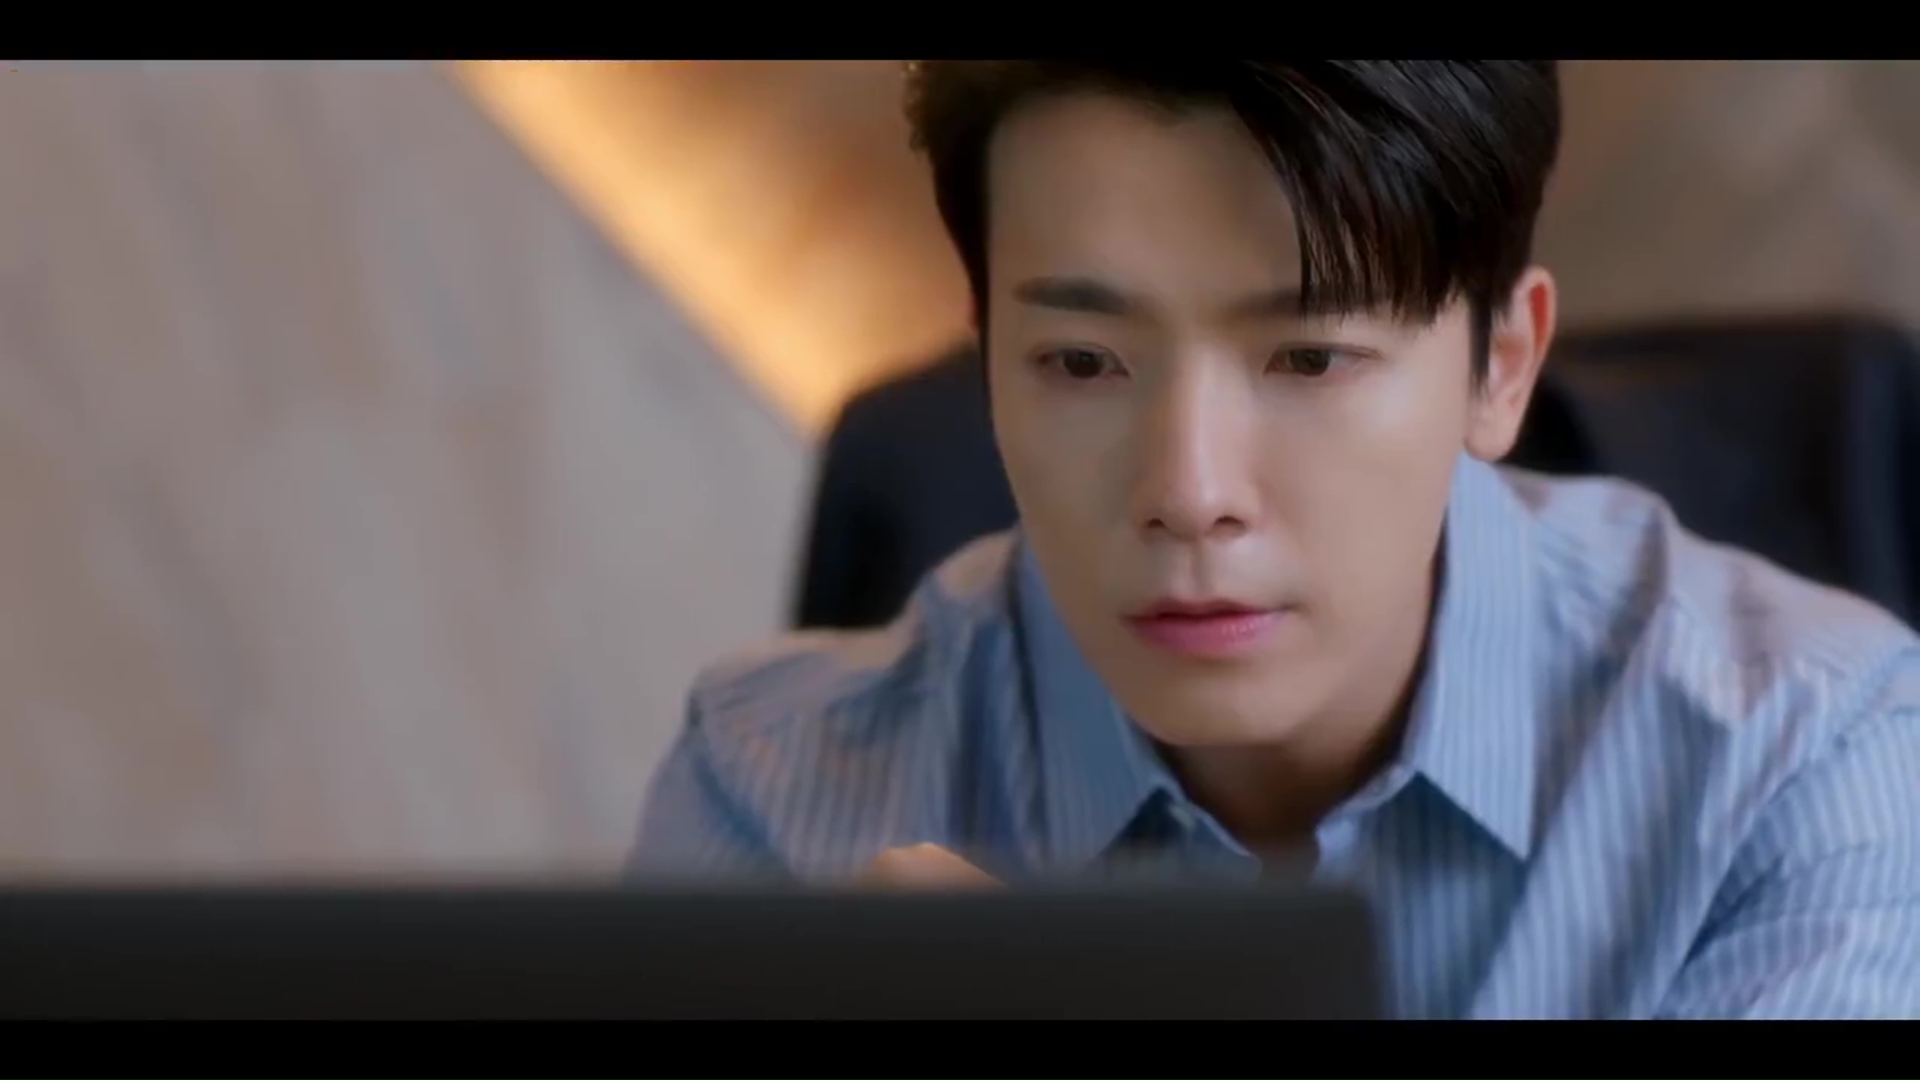 Donghae in Oh! Young-shim: Episodes 1-2